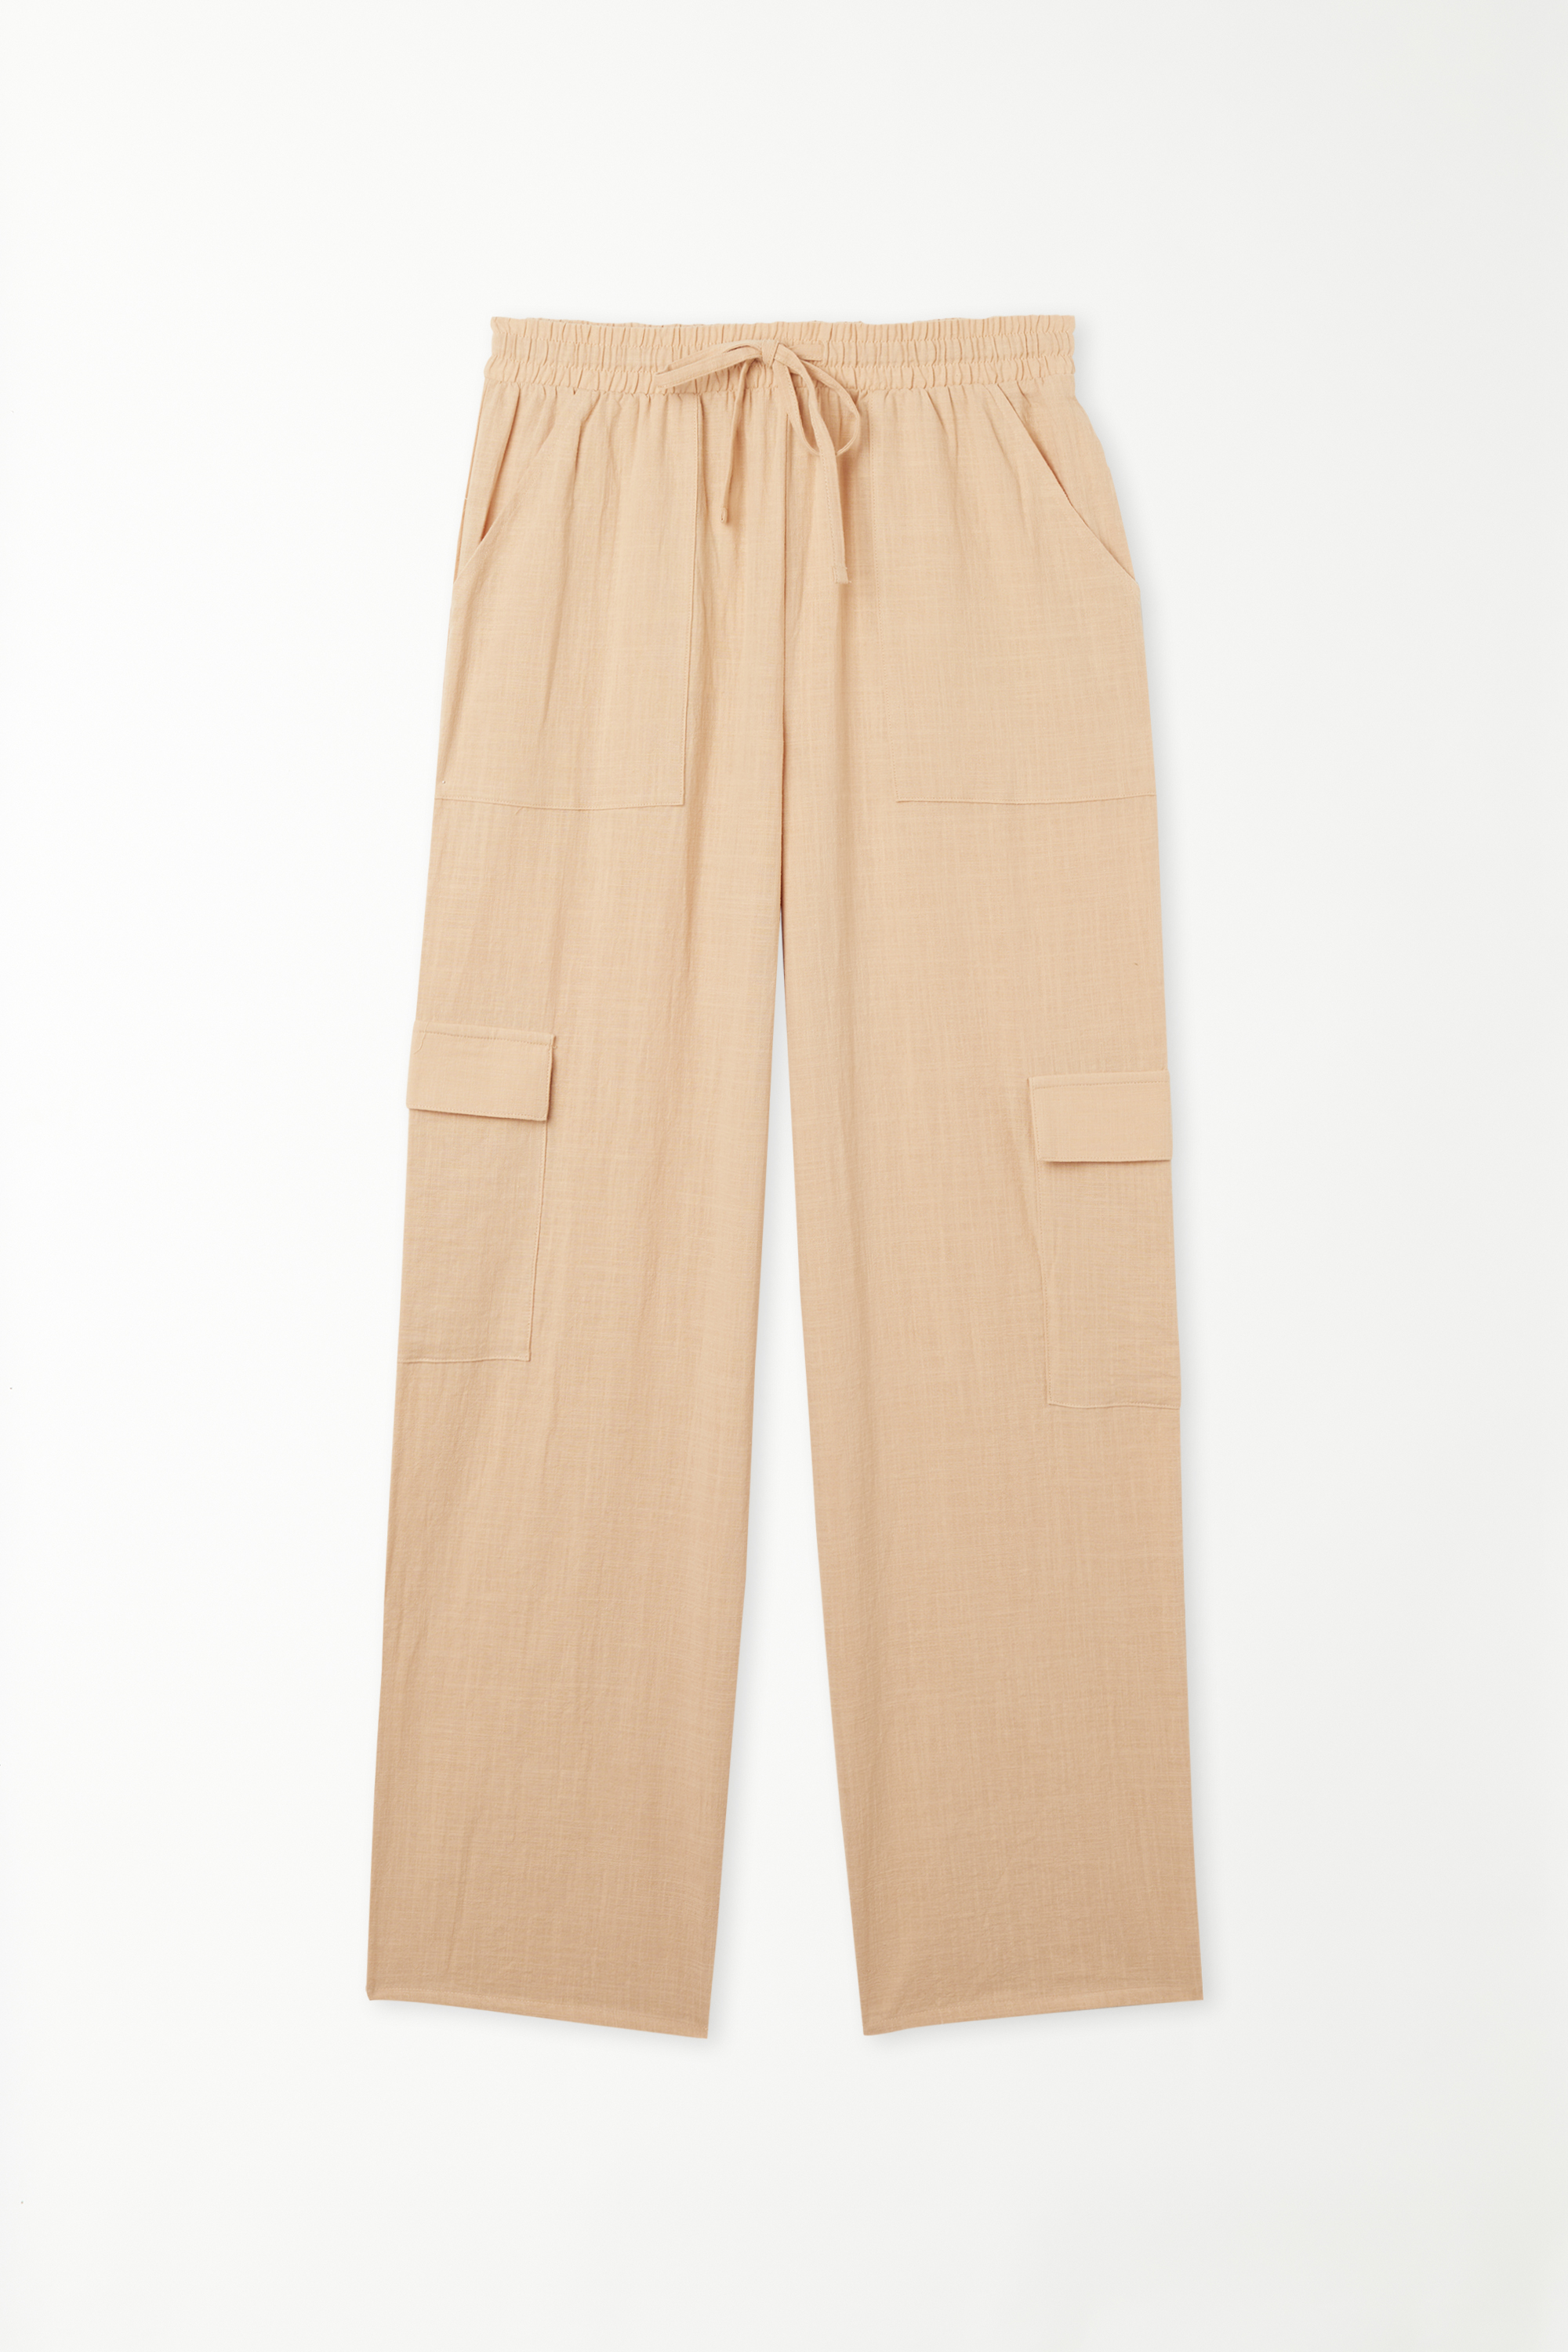 Super Light Cotton Trousers with Pockets